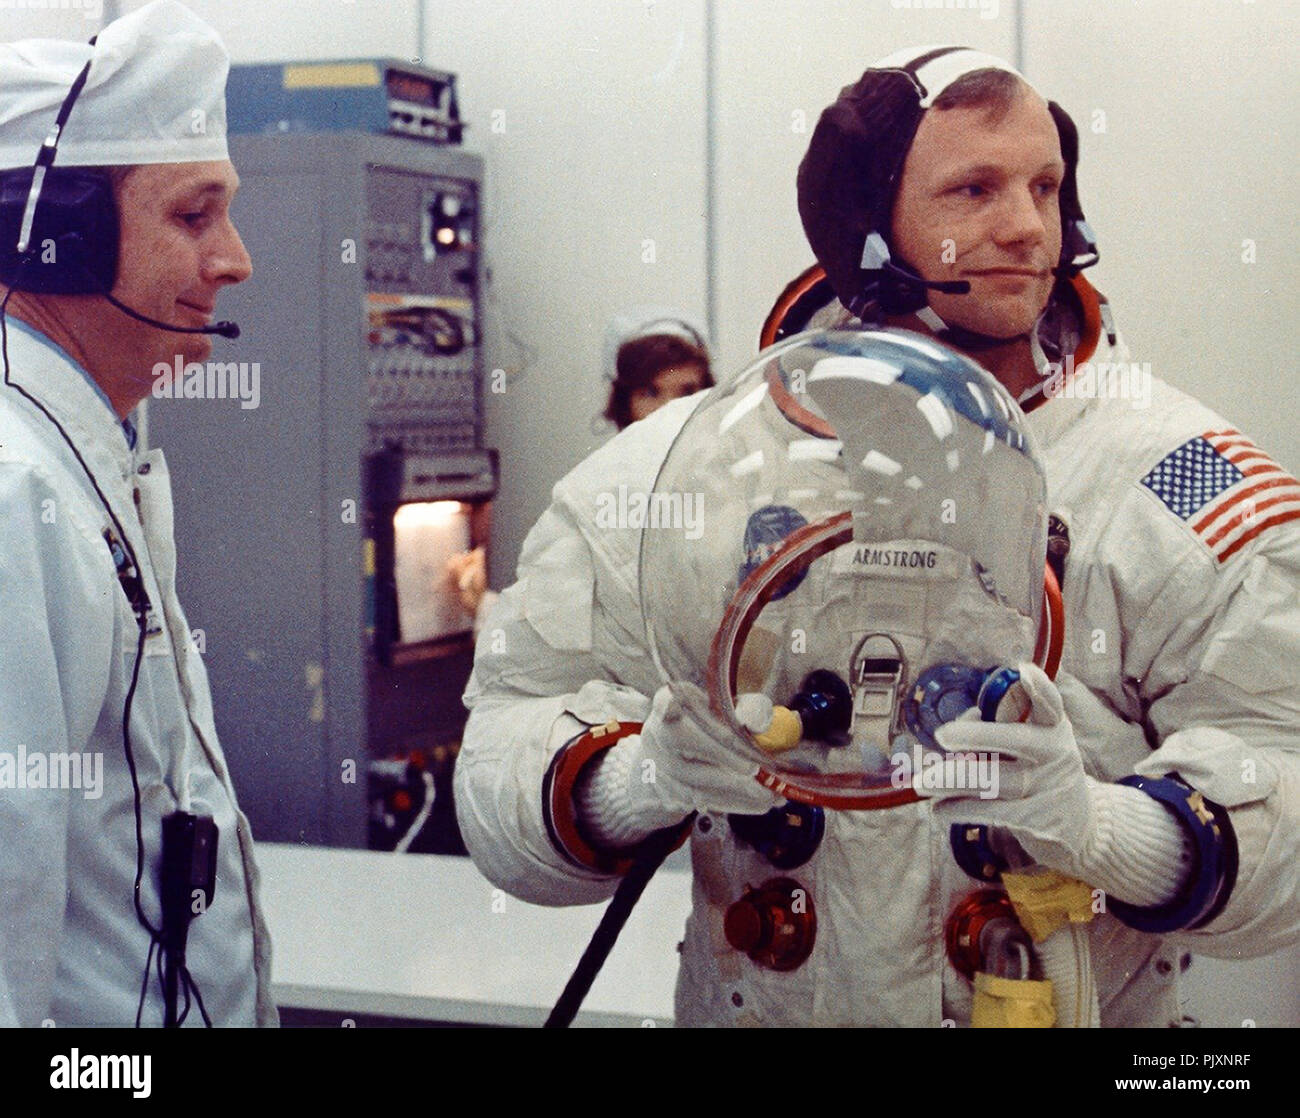 Cape Canaveral, FL - (FILE) -- Apollo 11 Commander Neil A. Armstrong prepares to don his helmet as he puts on his space suit as he prepares for the launch of the Apollo 11 Mission to the Moon on Wednesday, July 16, 1969. Credit: NASA via CNP /MediaPunch Stock Photo